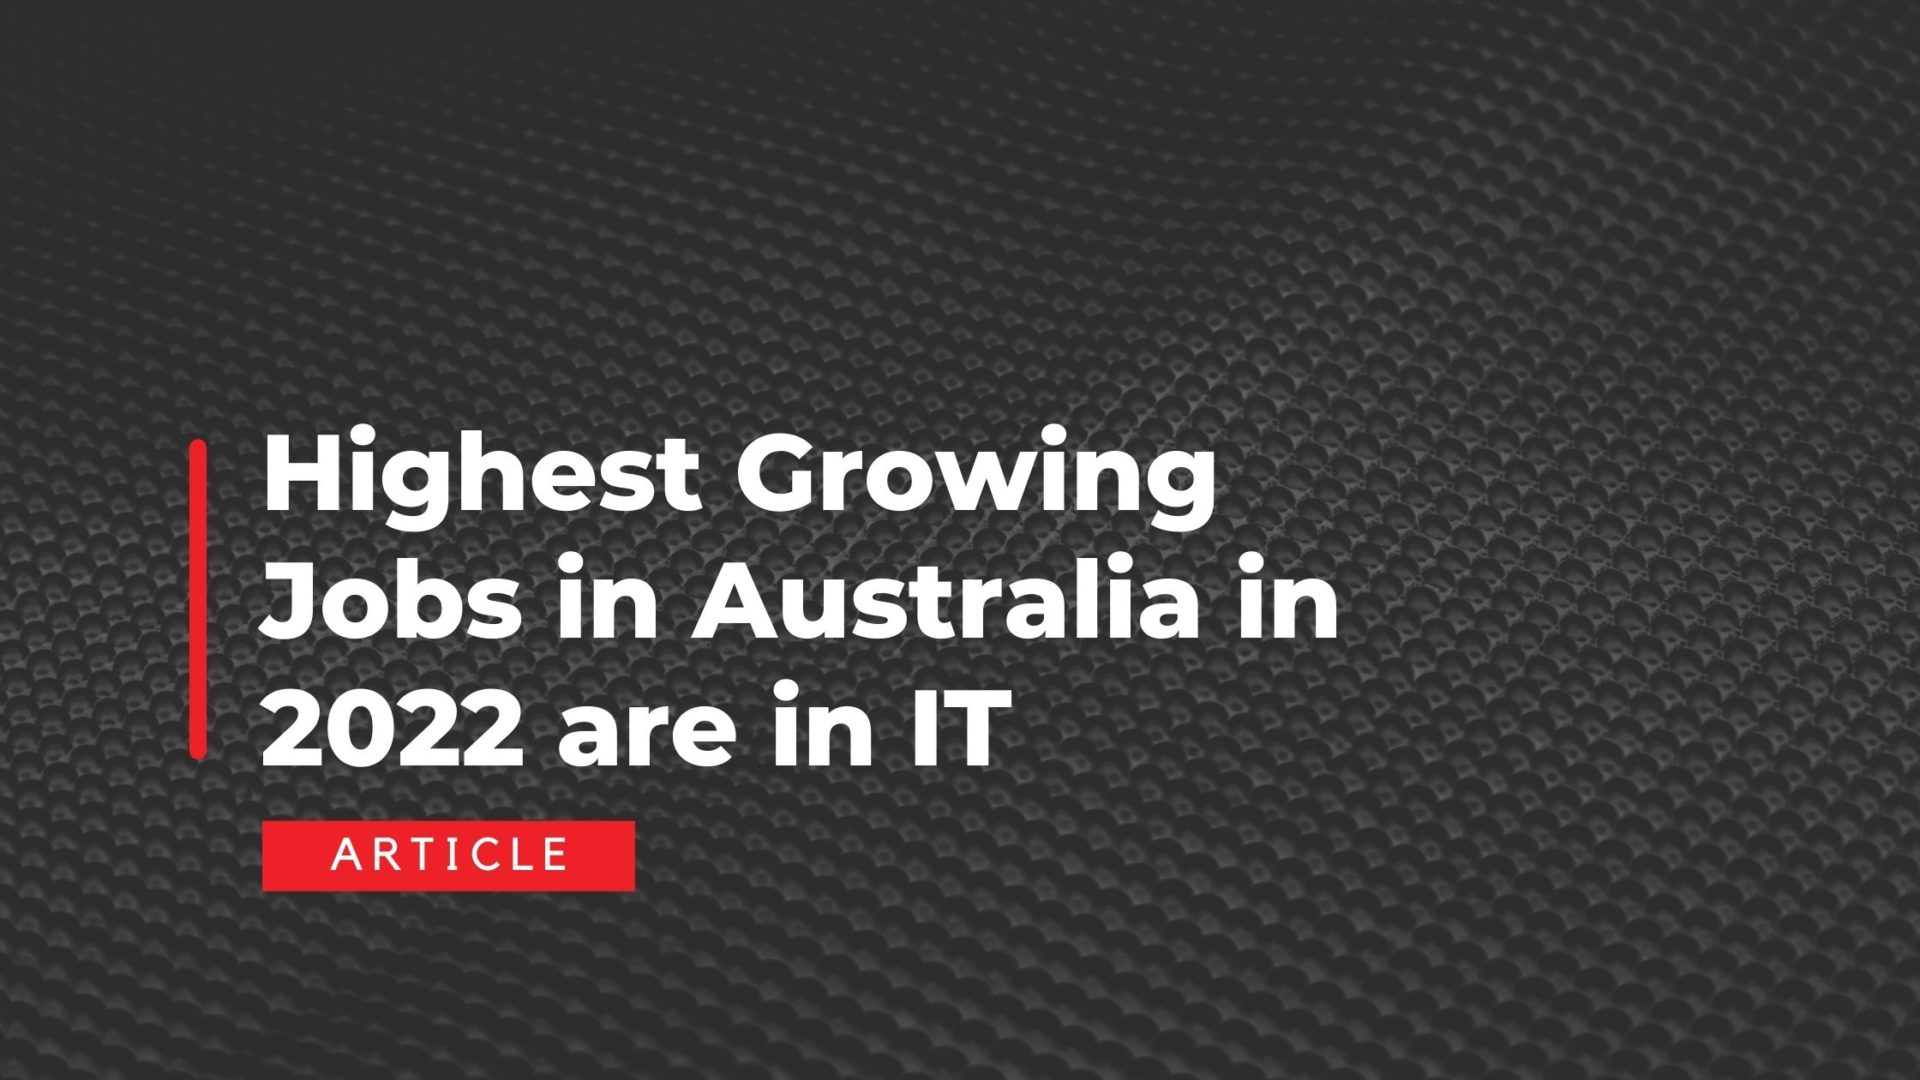 New Report Shows that the Highest Growing Jobs in Australia in 2022 are in IT